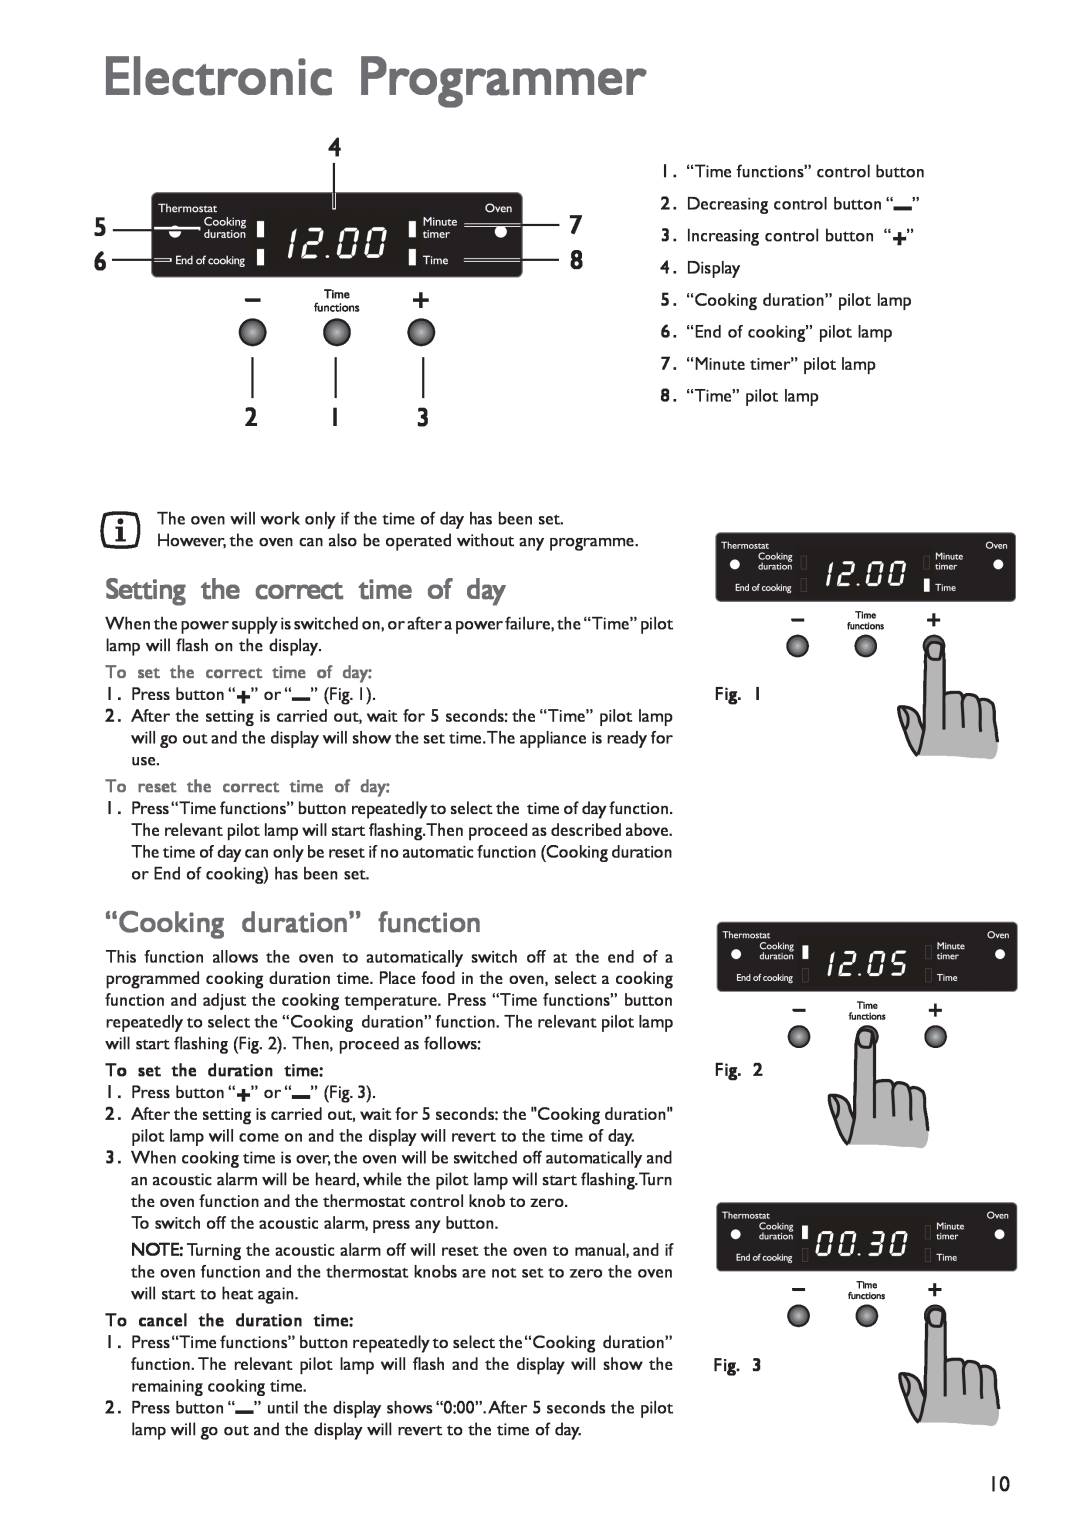 John Lewis JLBIOS601 instruction manual Electronic Programmer, Setting the correct time of day, “Cooking duration” function 